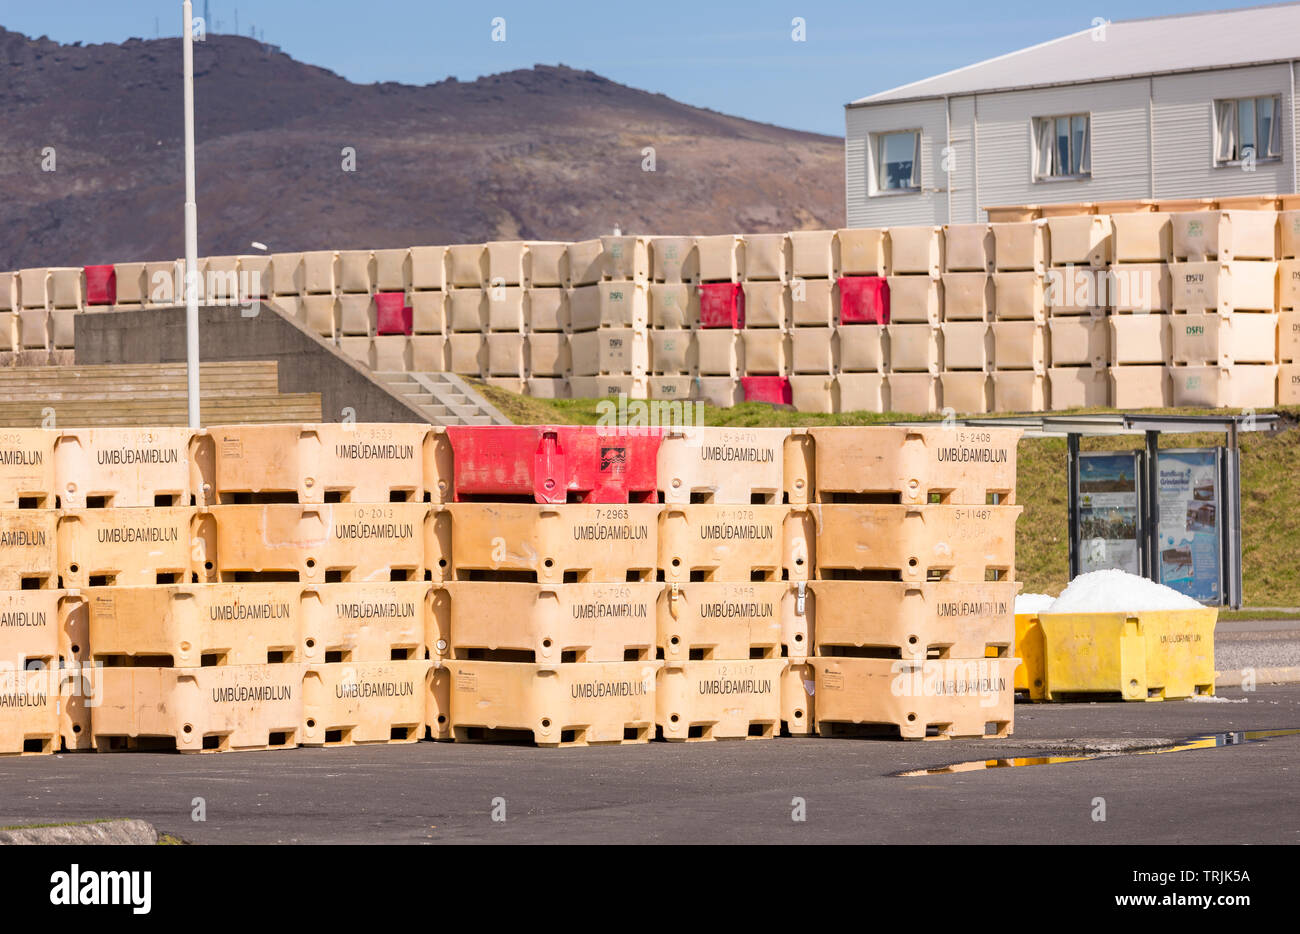 GRINDAVIK, ICELAND - Fishing industry containers in harbor town in southwestern Iceland. Stock Photo